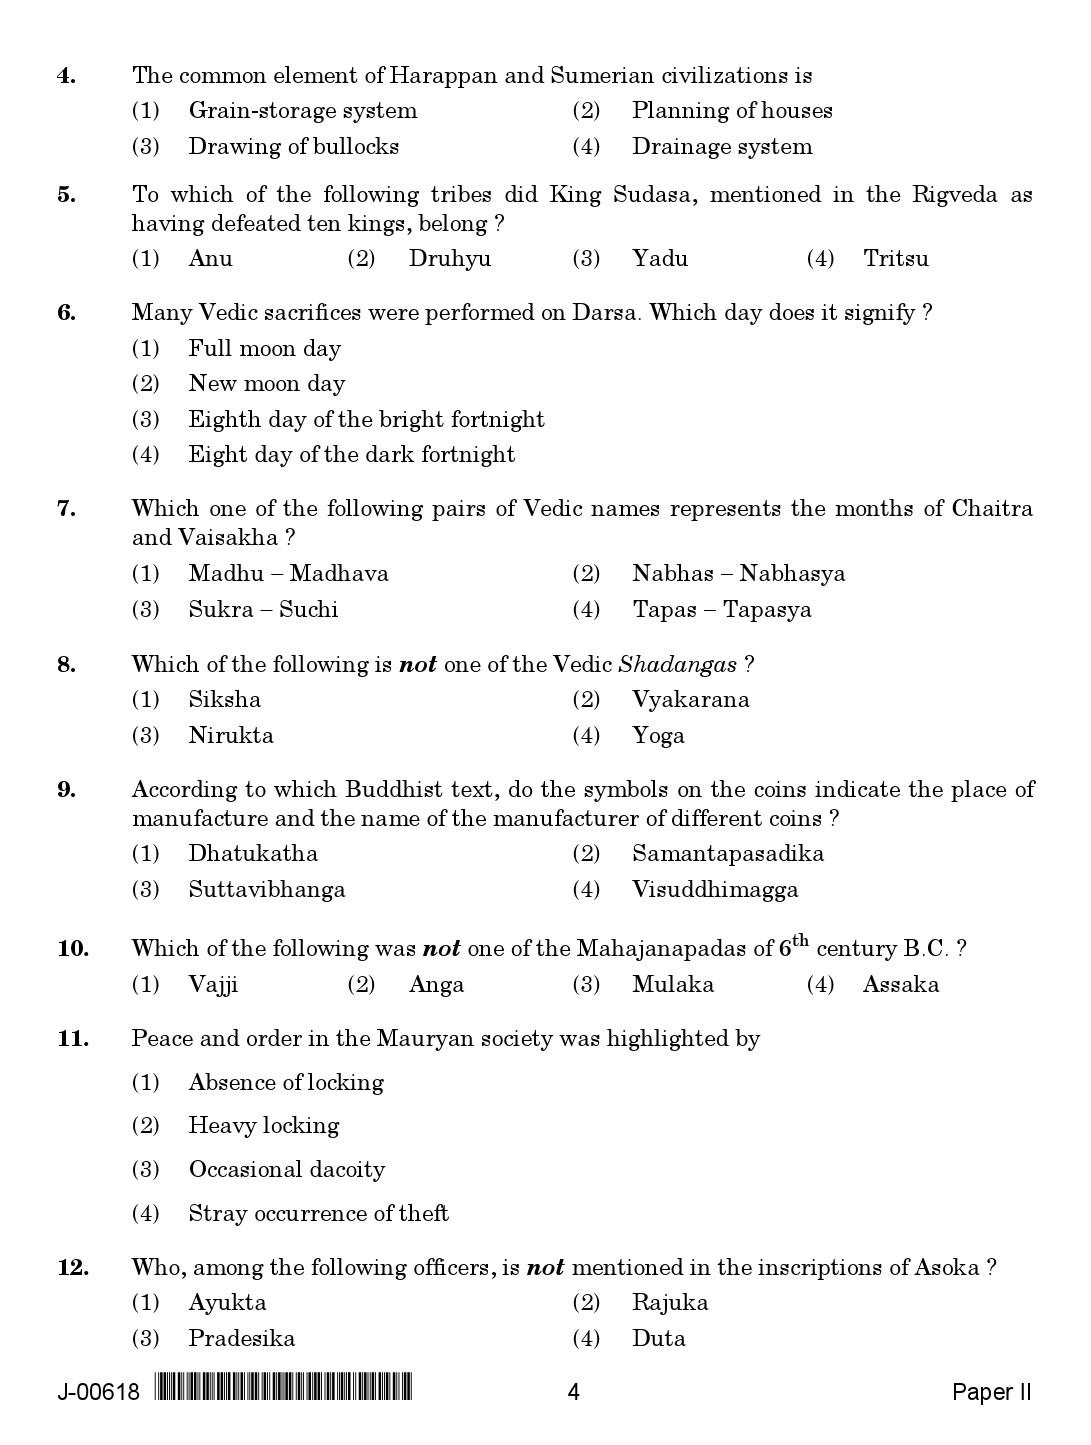 History Question Paper II July 2018 in English 2nd Exam 3